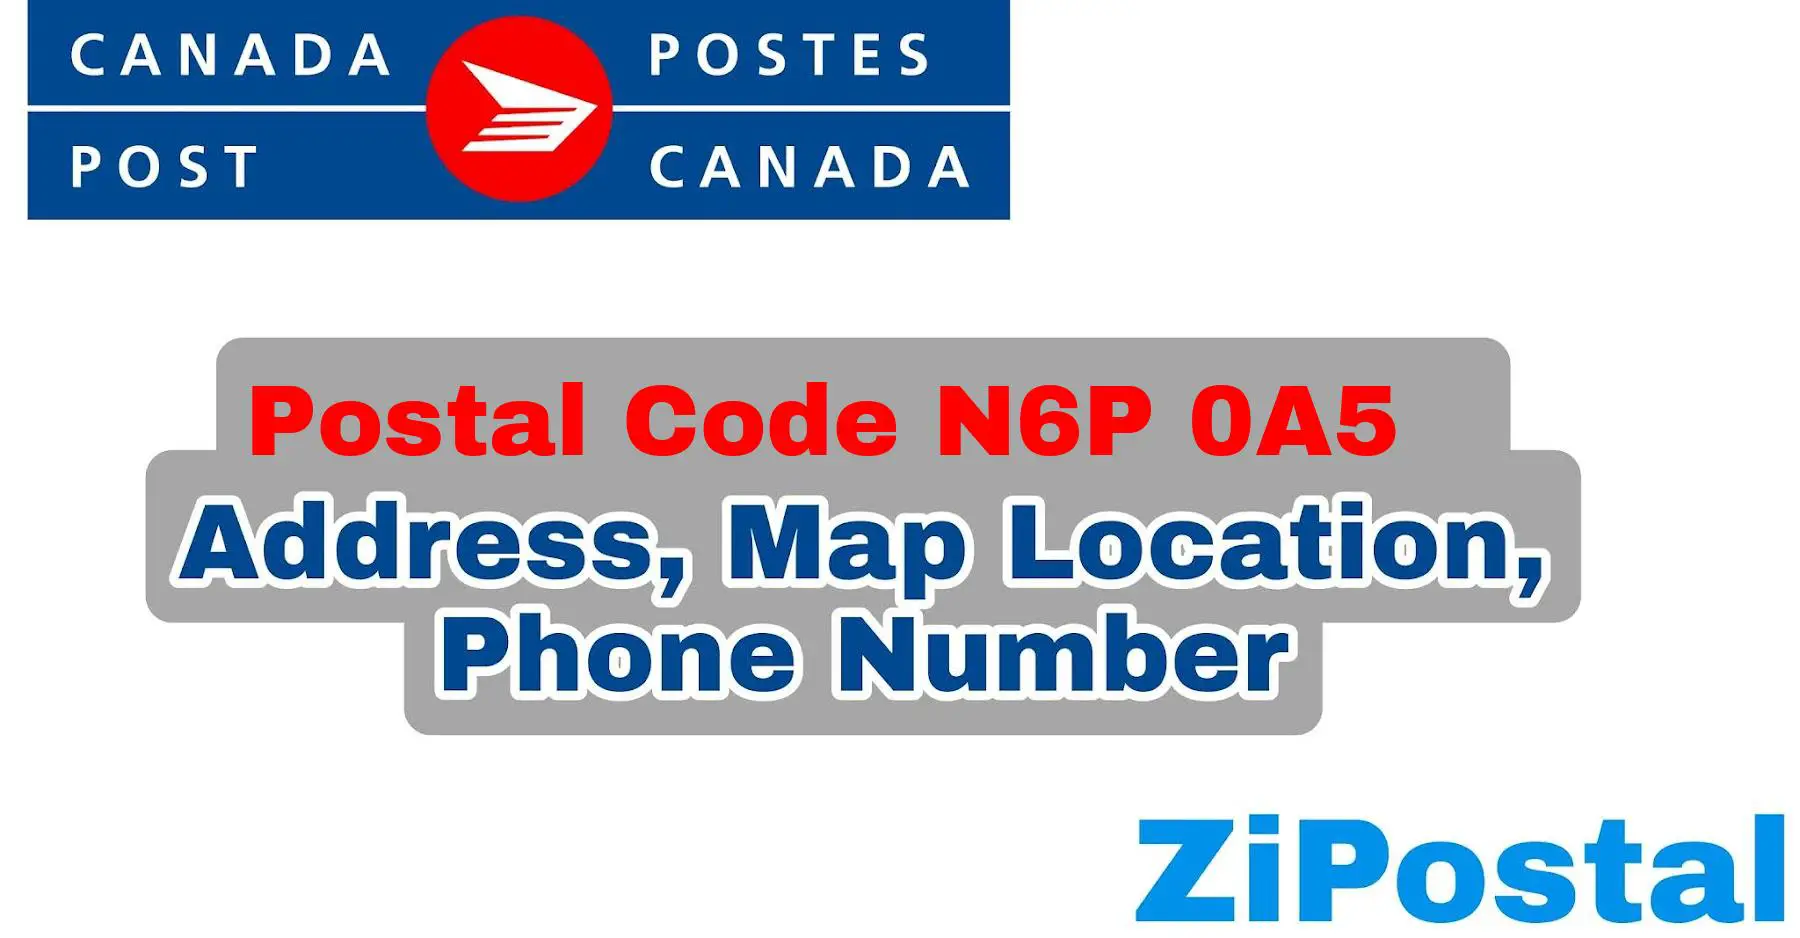 Postal Code N6P 0A5 Address Map Location and Phone Number